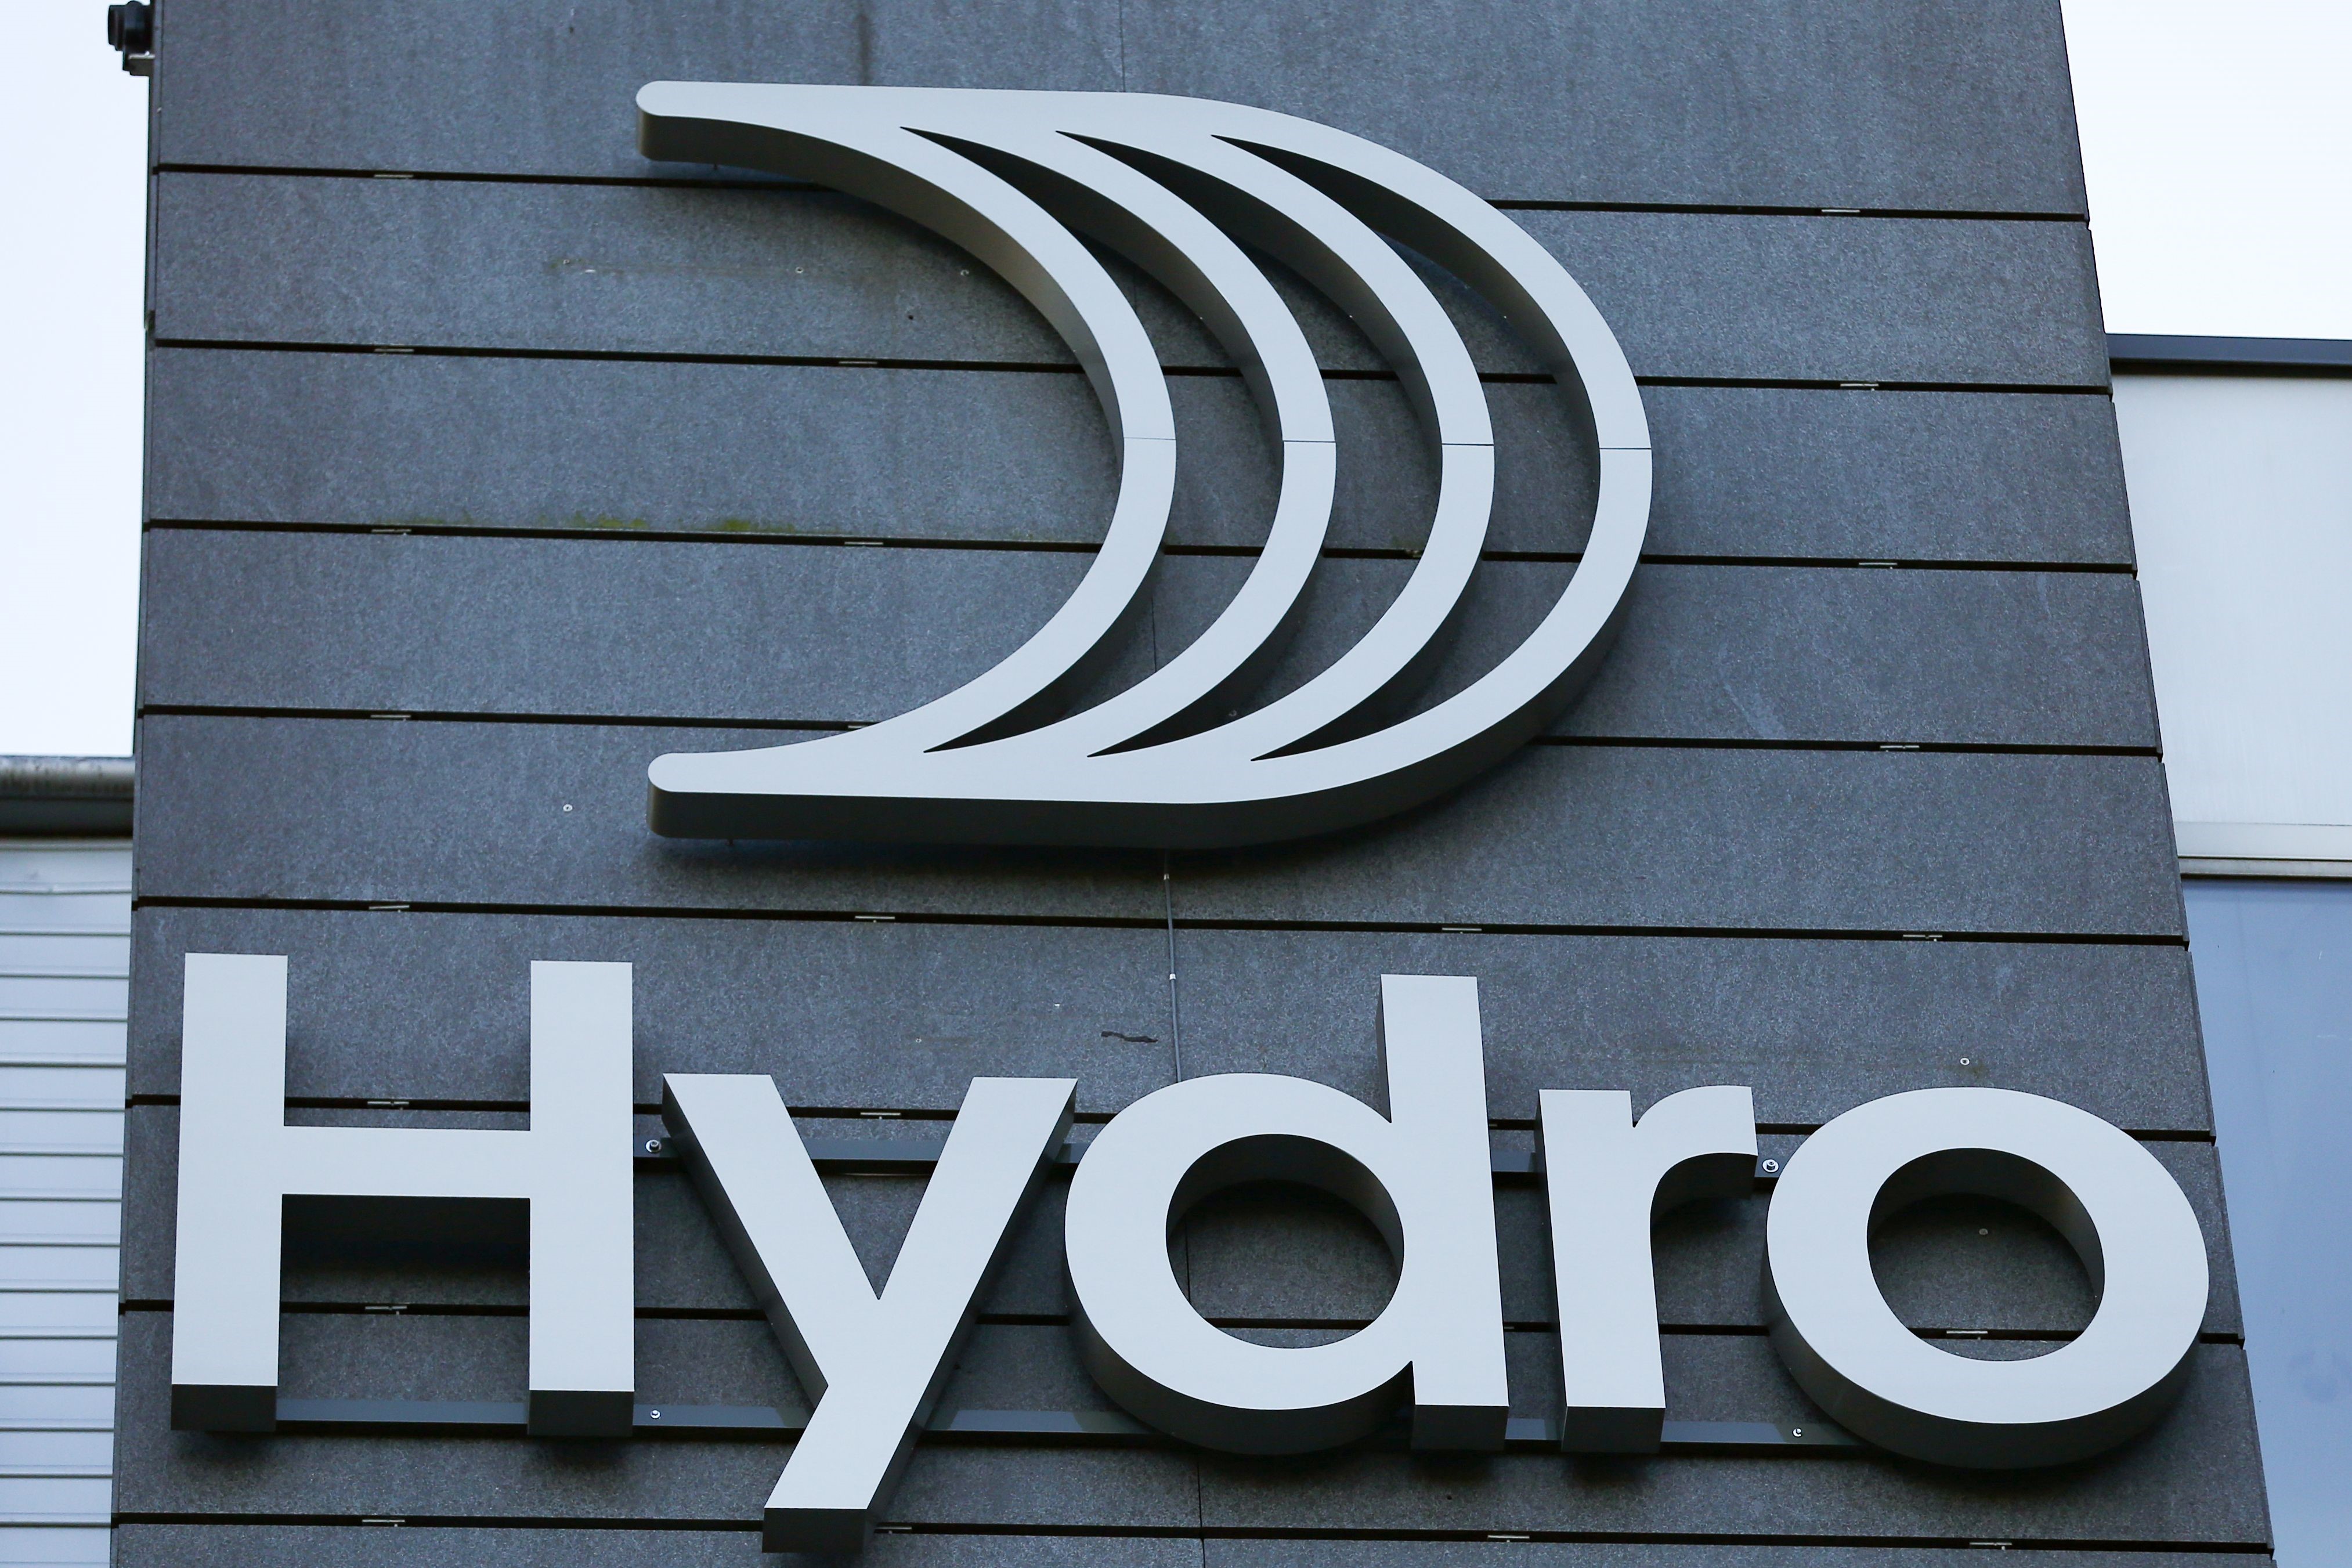 Hydro resumes tender offer process to acquire 100% share of Alumetal S.A.; to strengthen low-carbon aluminium position